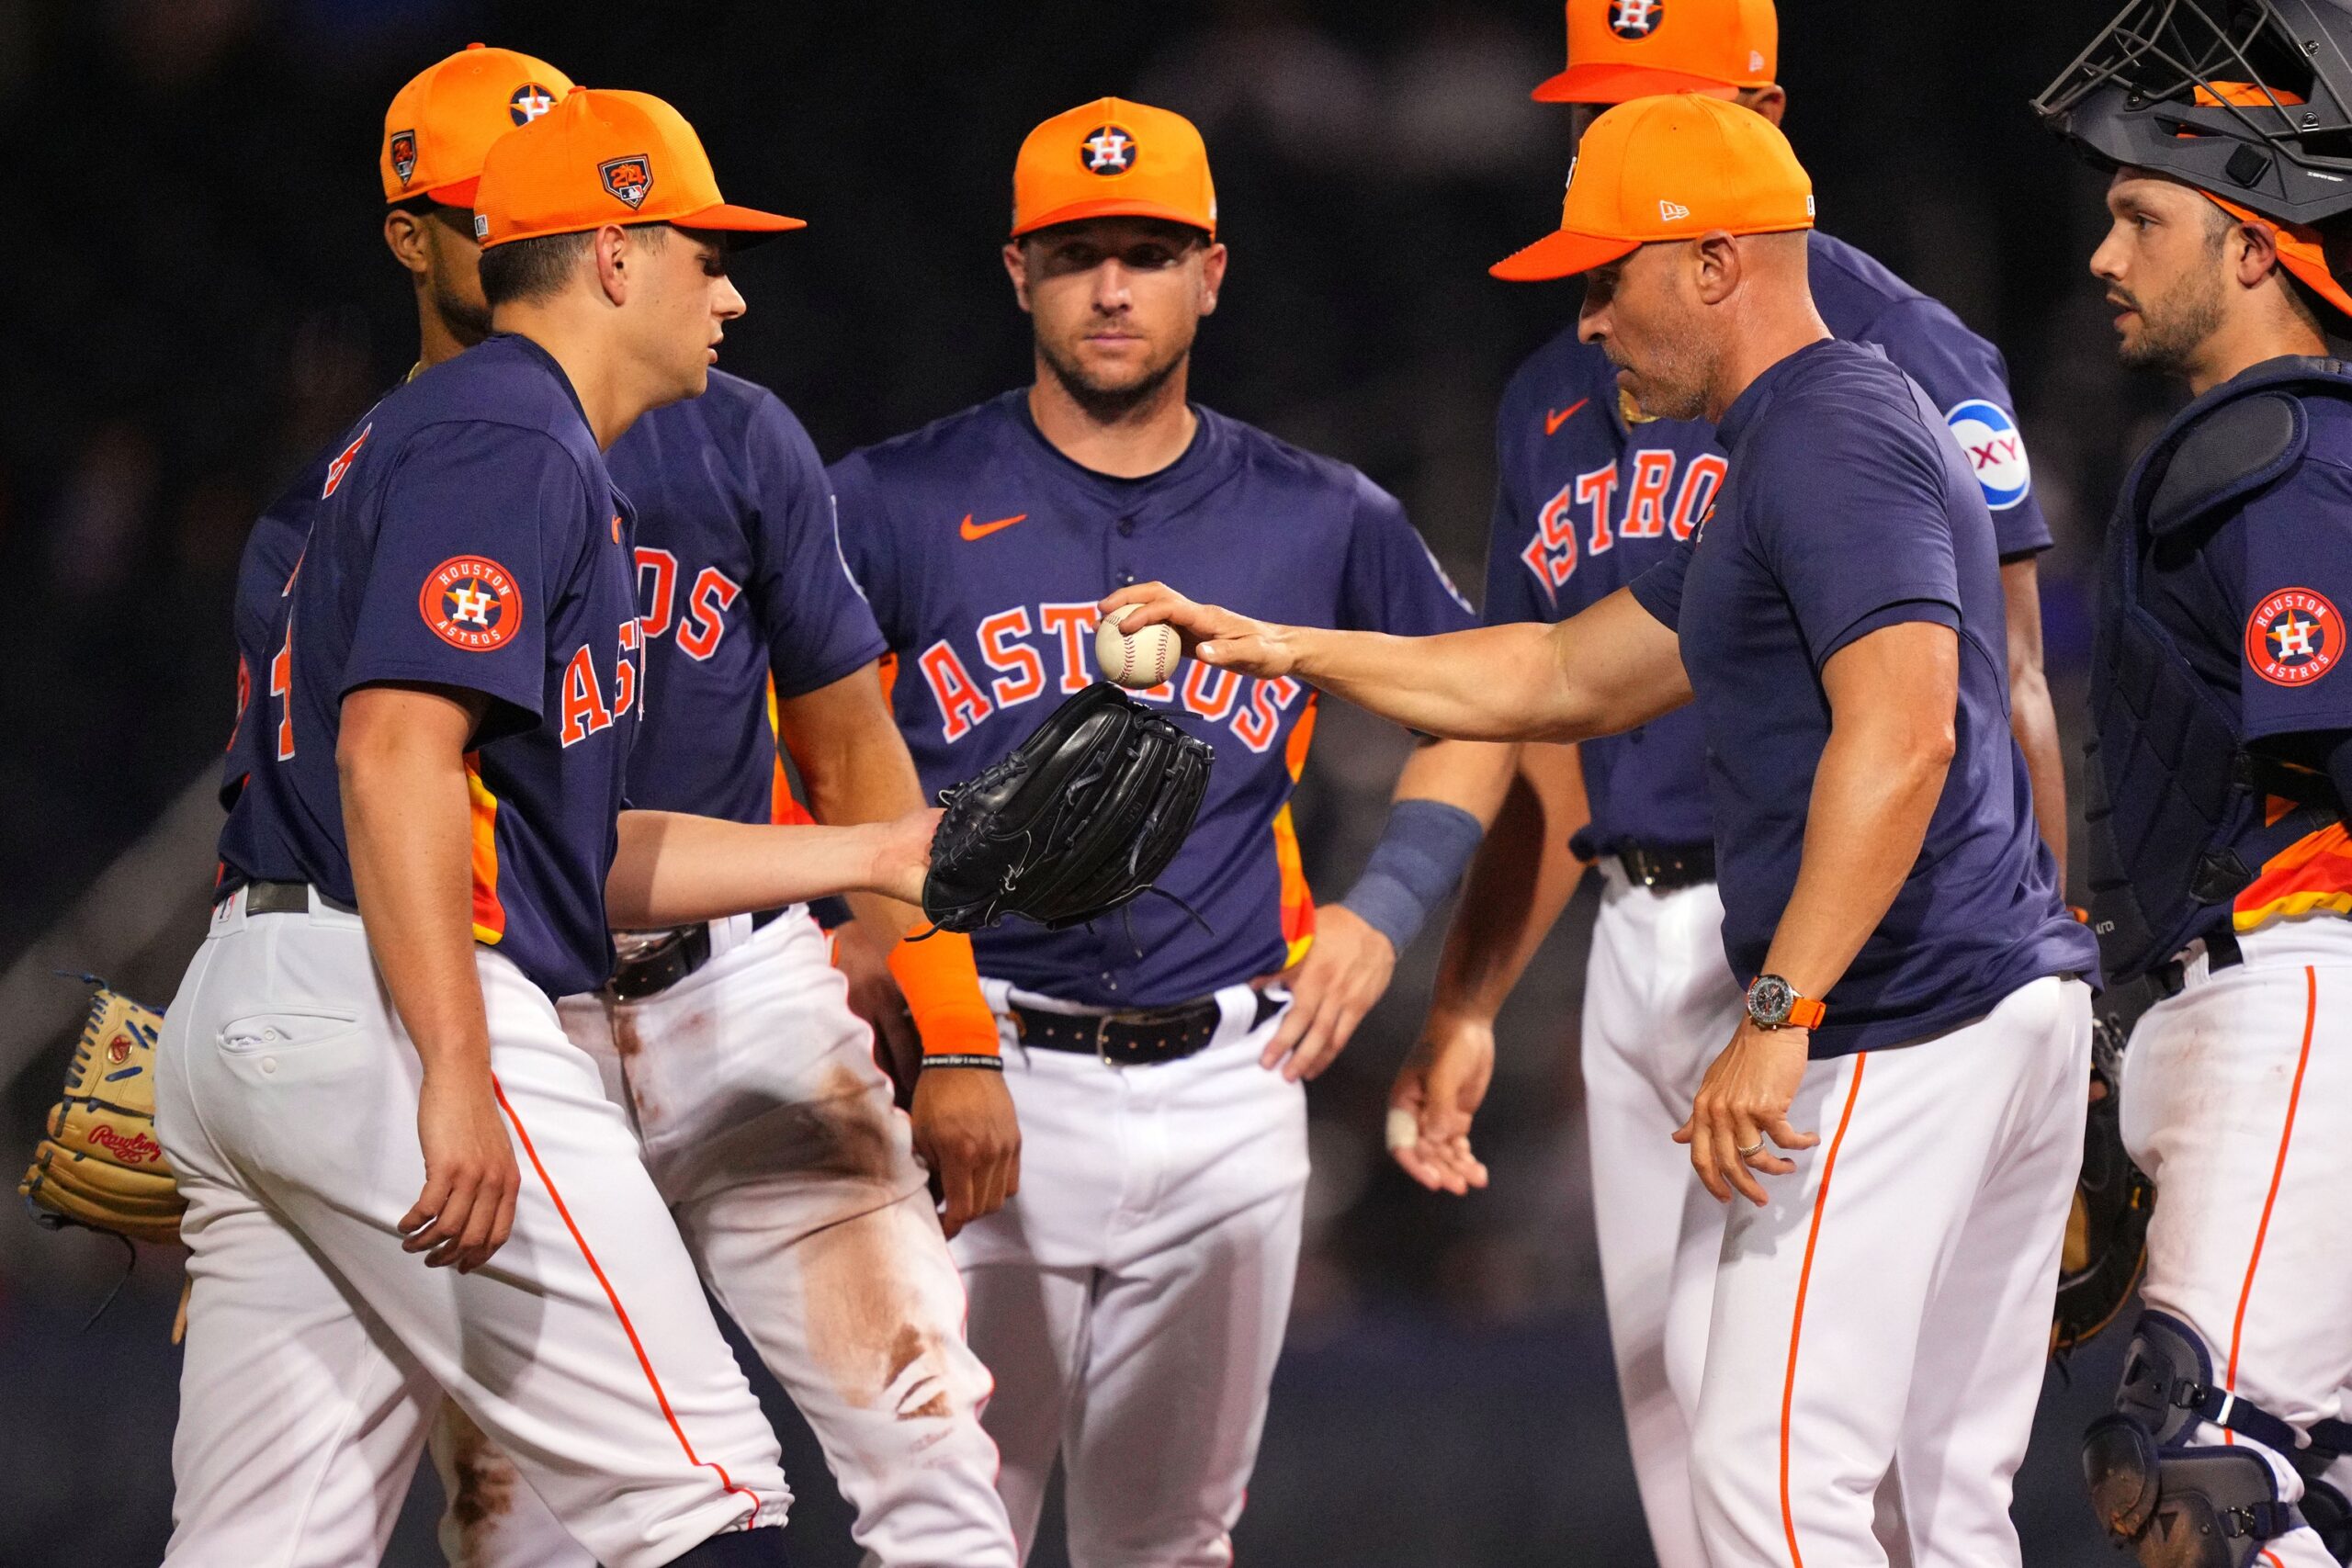 Athletics Acquire Right-Hander from Astros as Injuries Decimate Pitching Depth